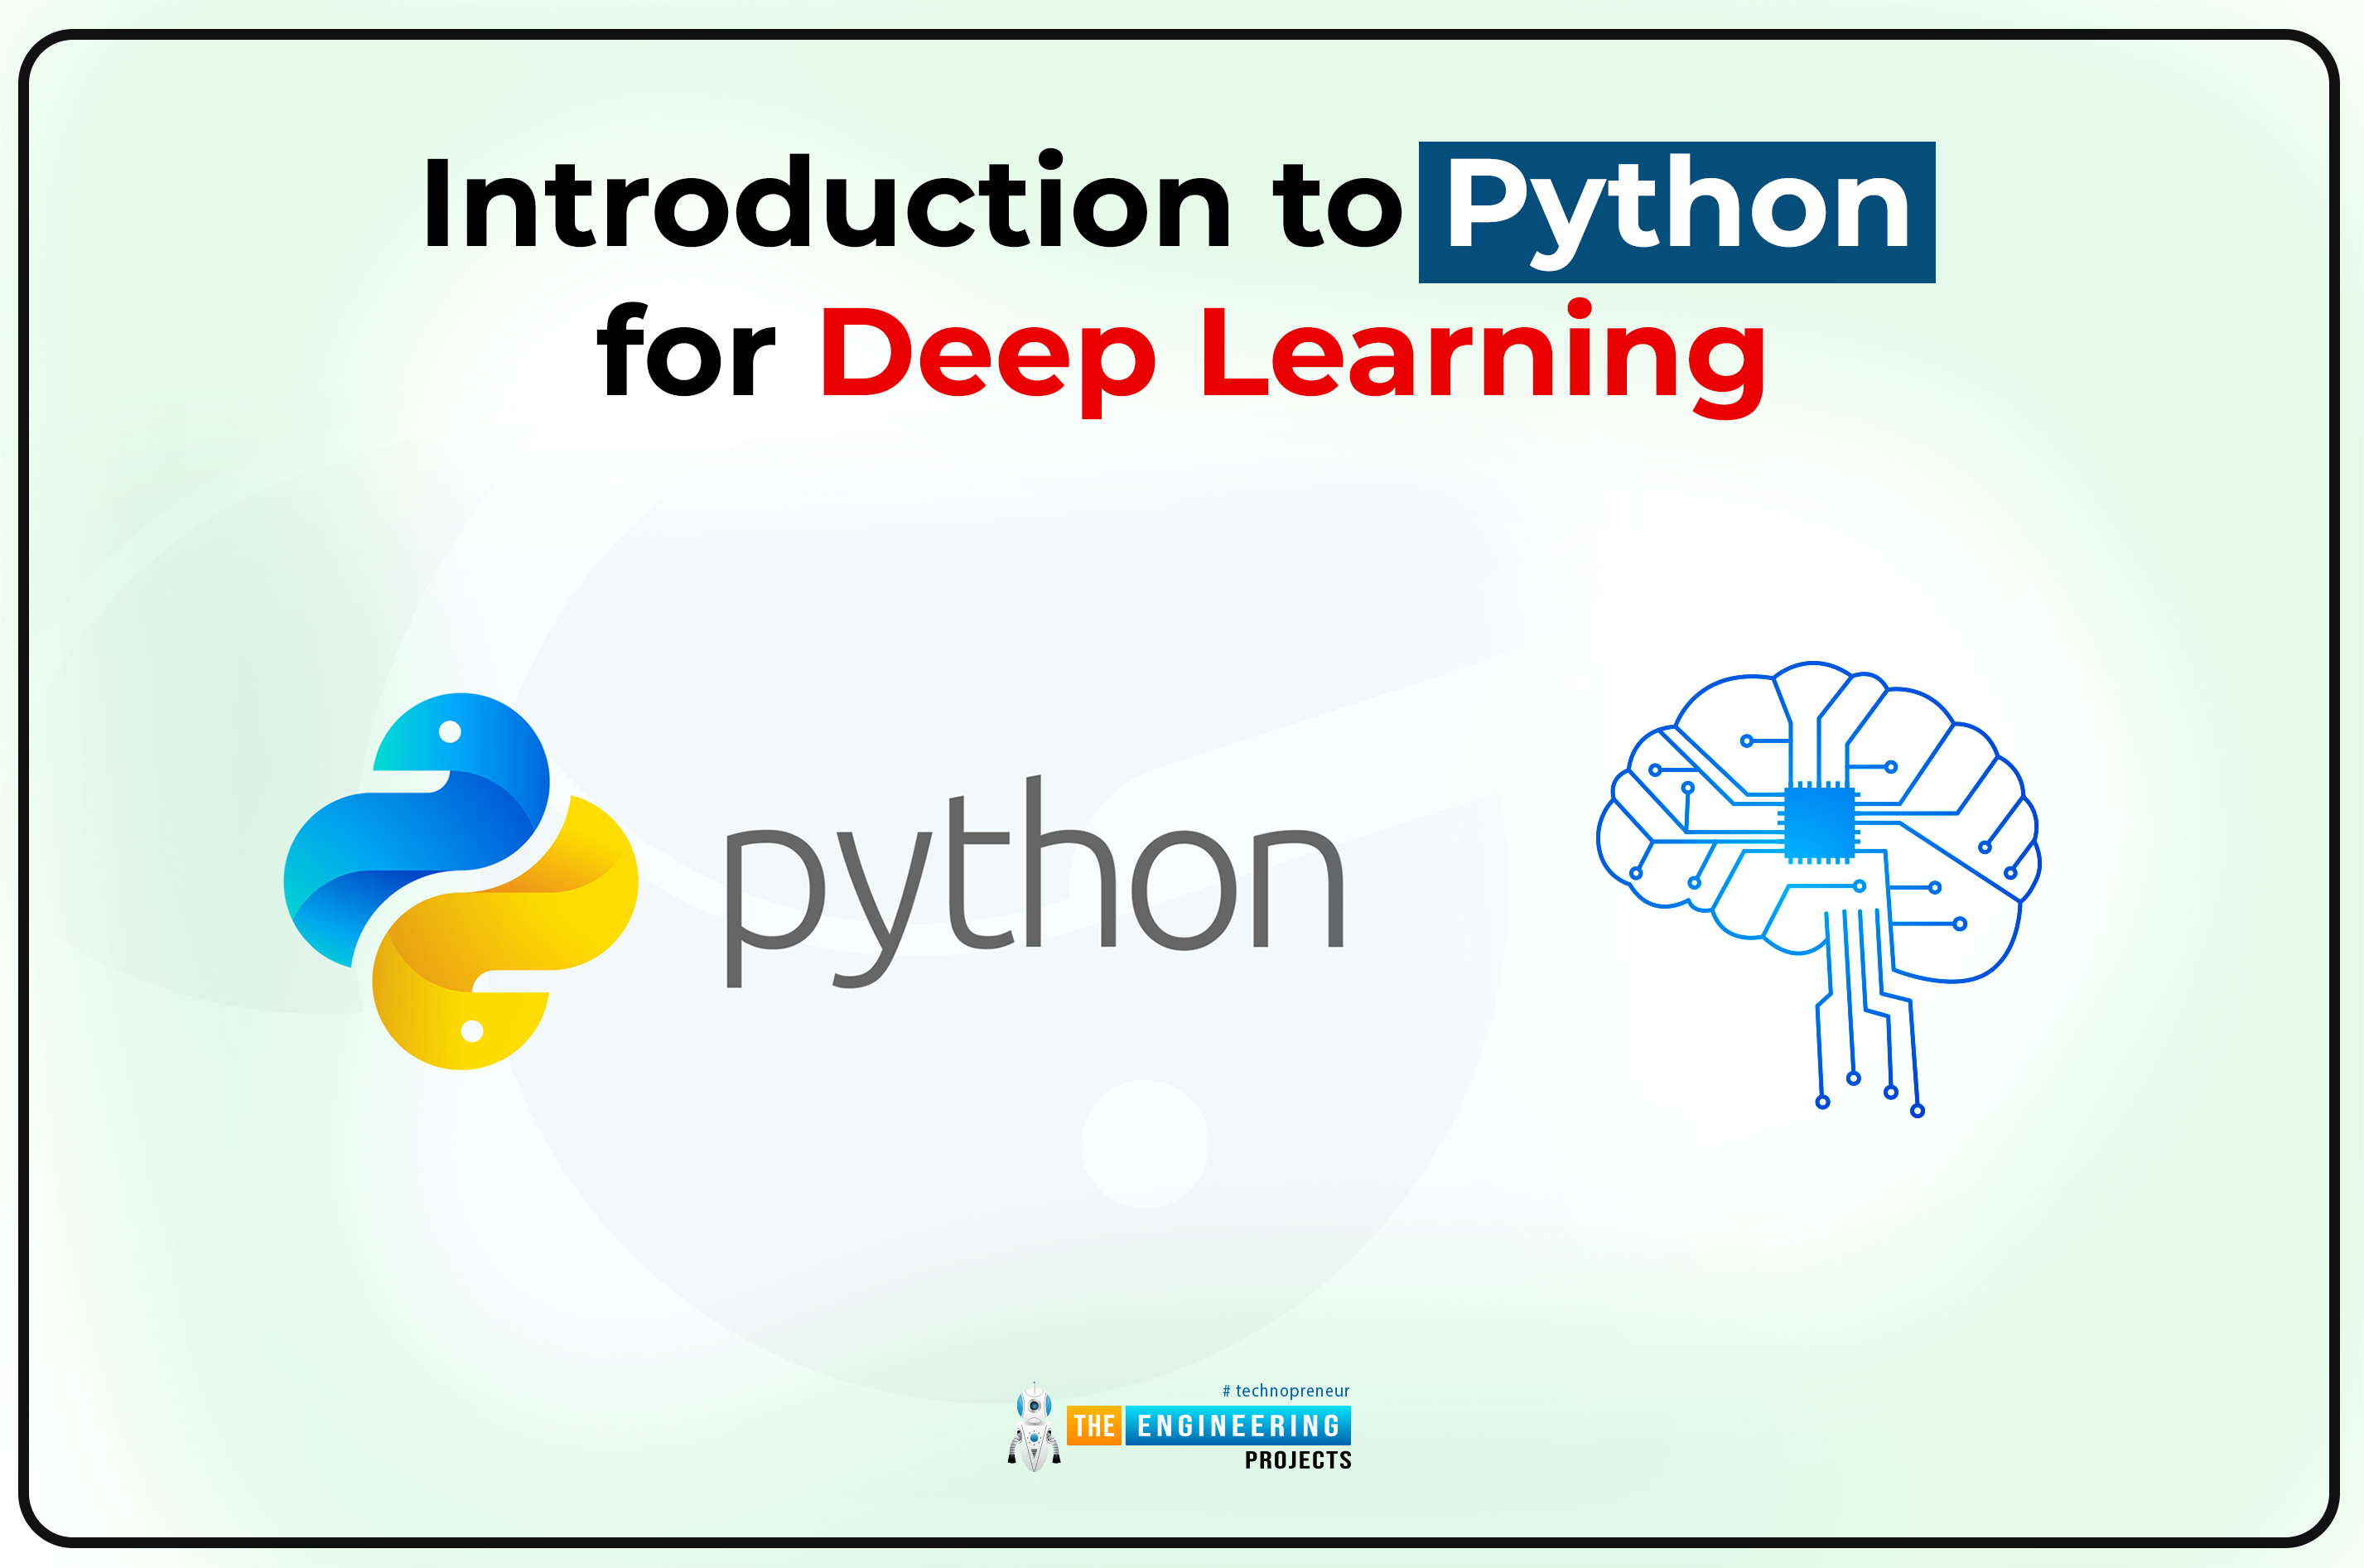 Getting Started with Python in TensorFlow, python tensorflow, tensorflow python, python in tensorflow, deep learning python, python deep learning